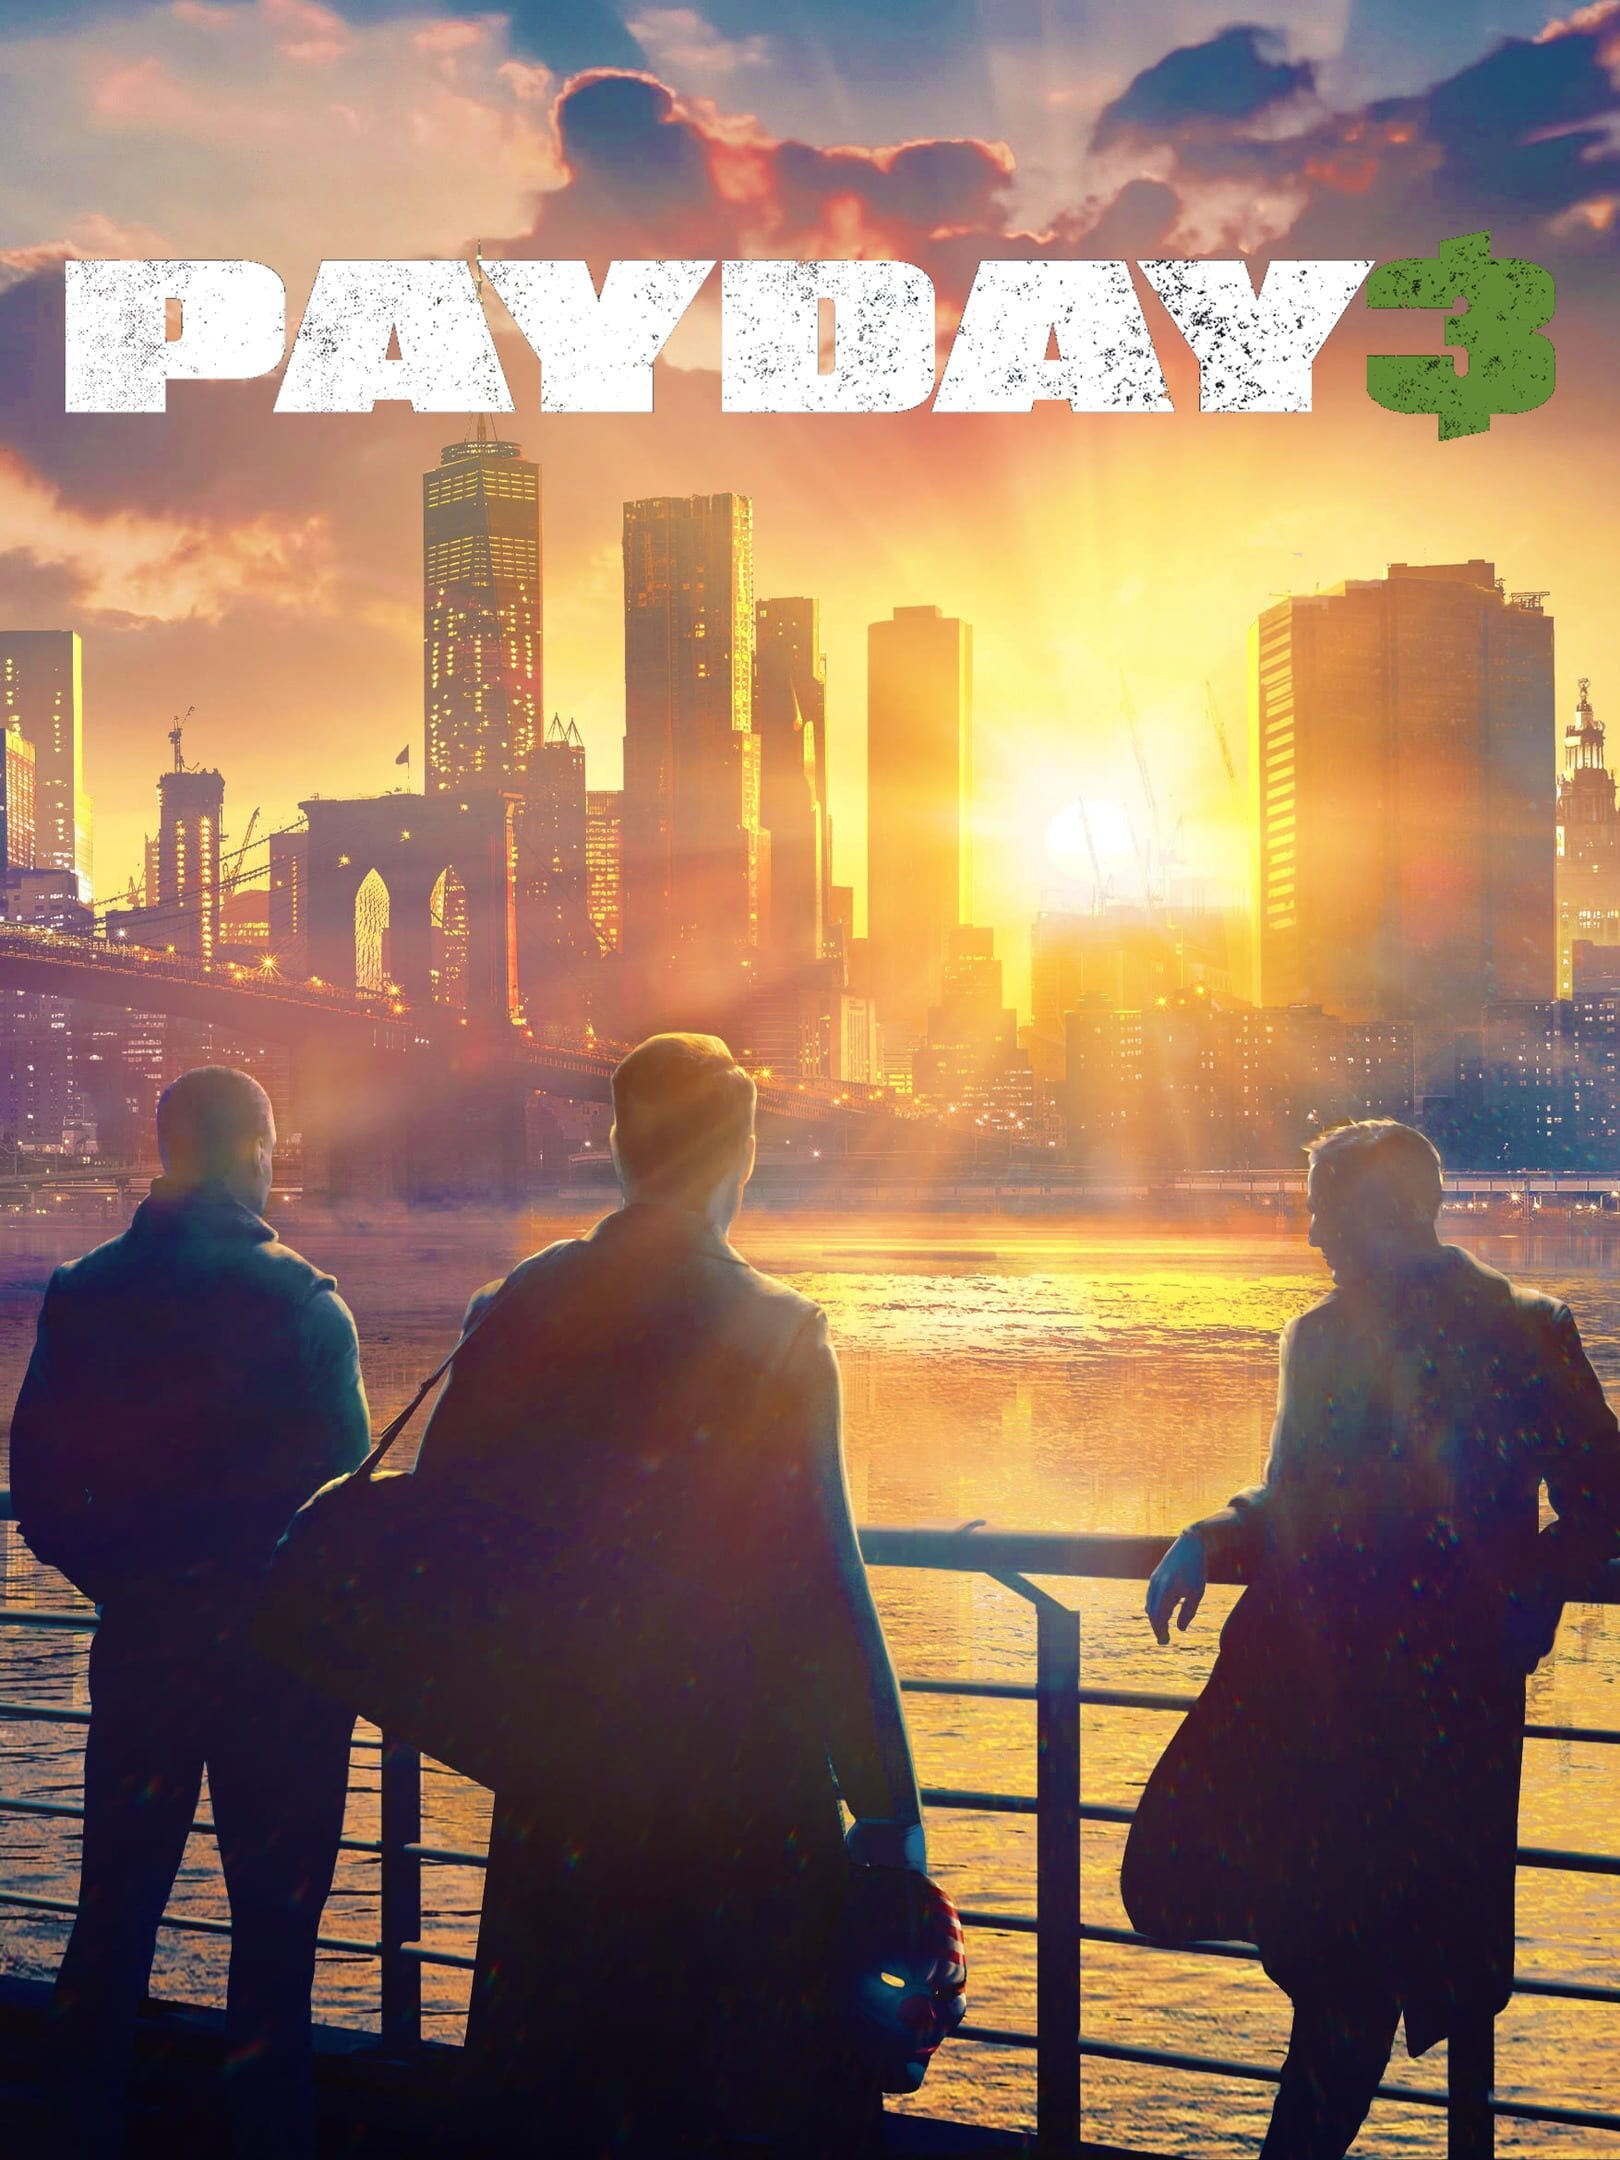 PAYDAY 3 Closed BETA - OVERKILL Software